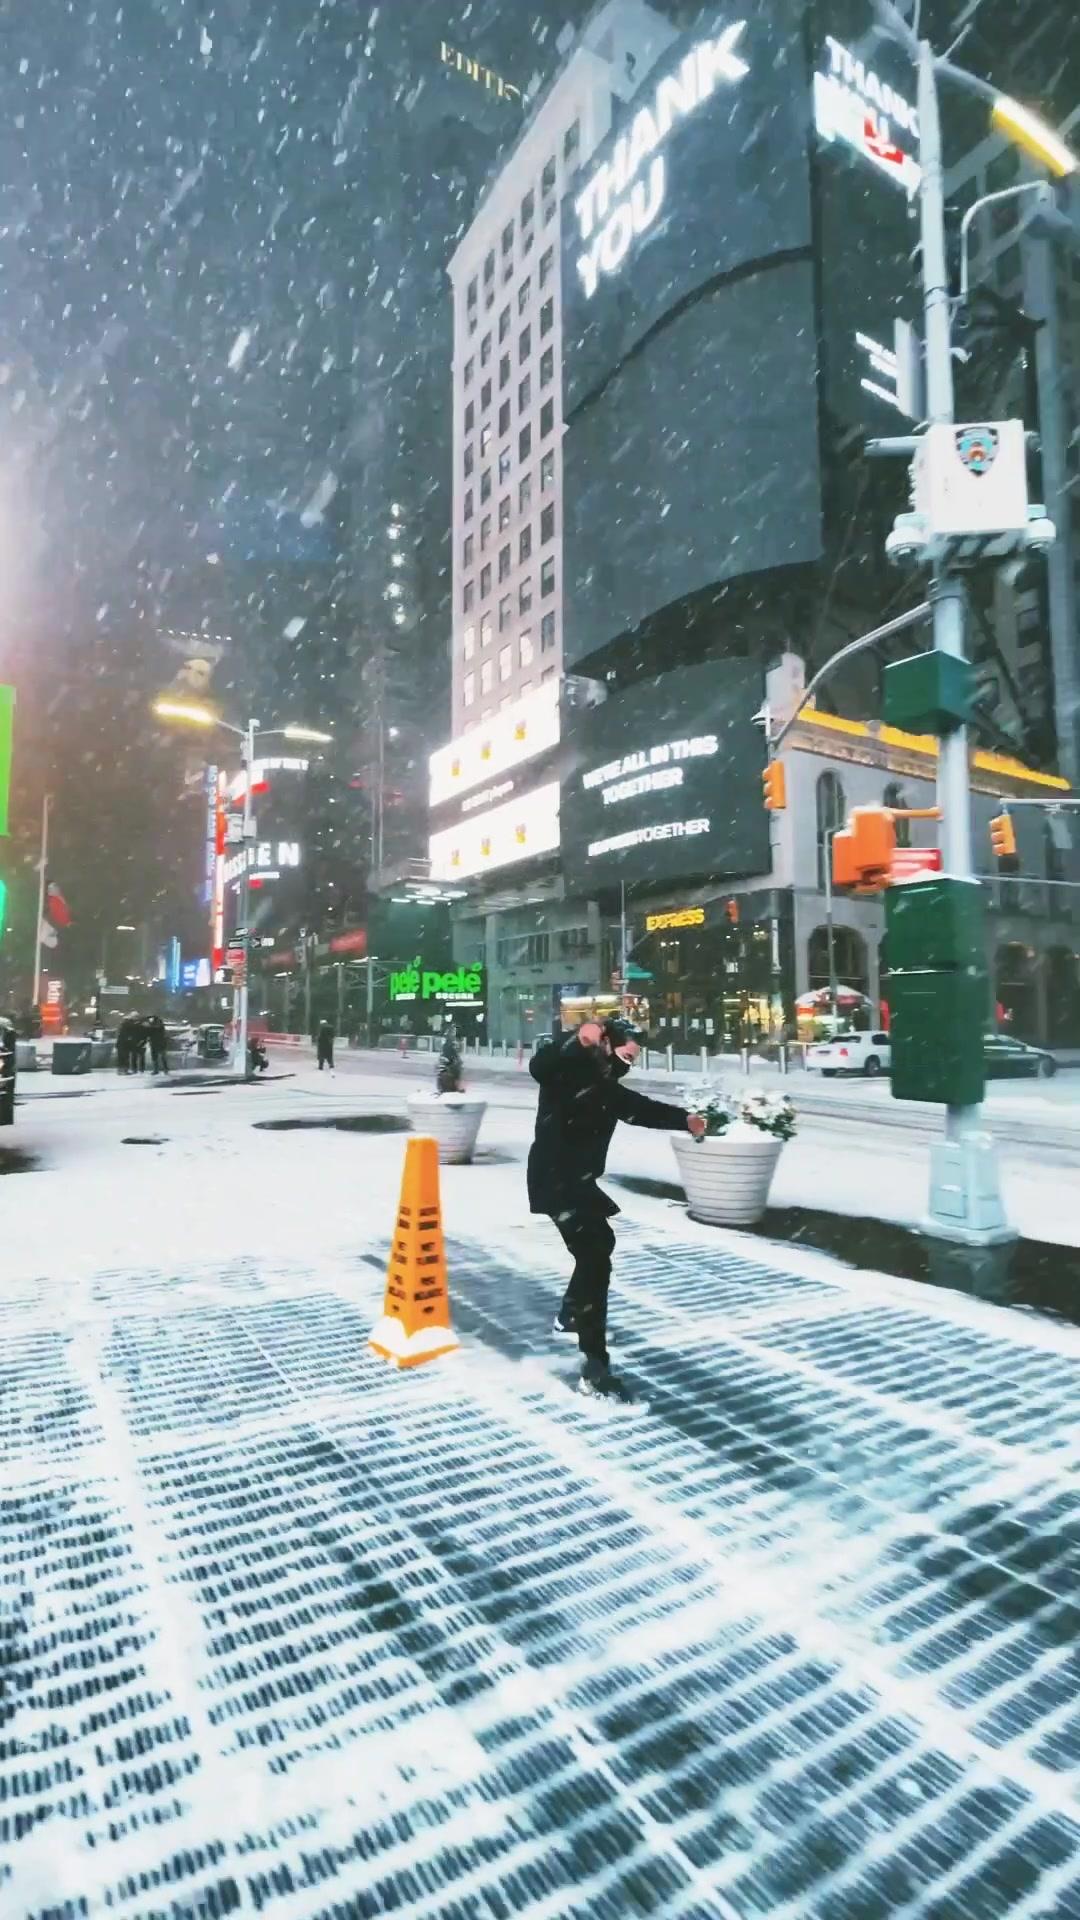 NYC SNOW ❄️🤩 nyc snow timessquare boostofhope fyp ....